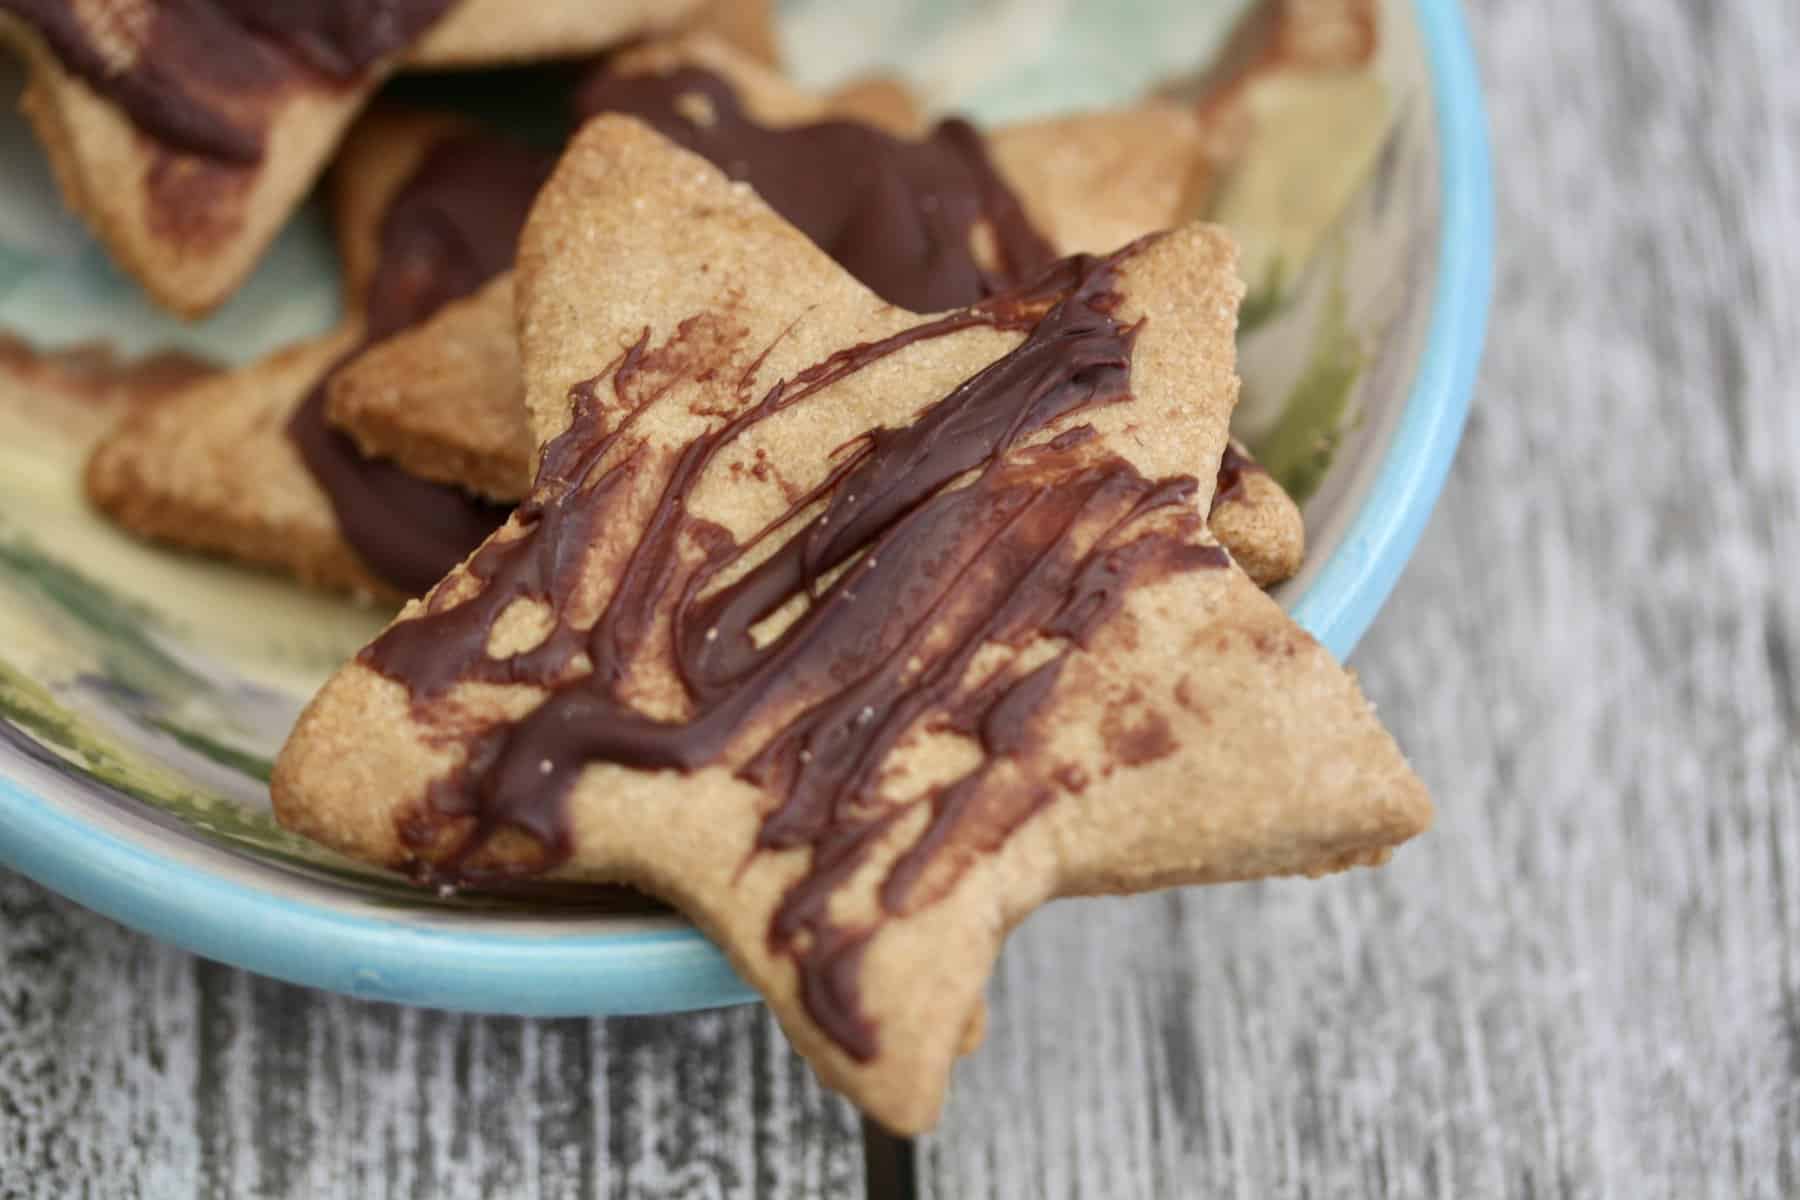 A close up of a dish of gluten free shortbread star cookies drizzled with chocolate.